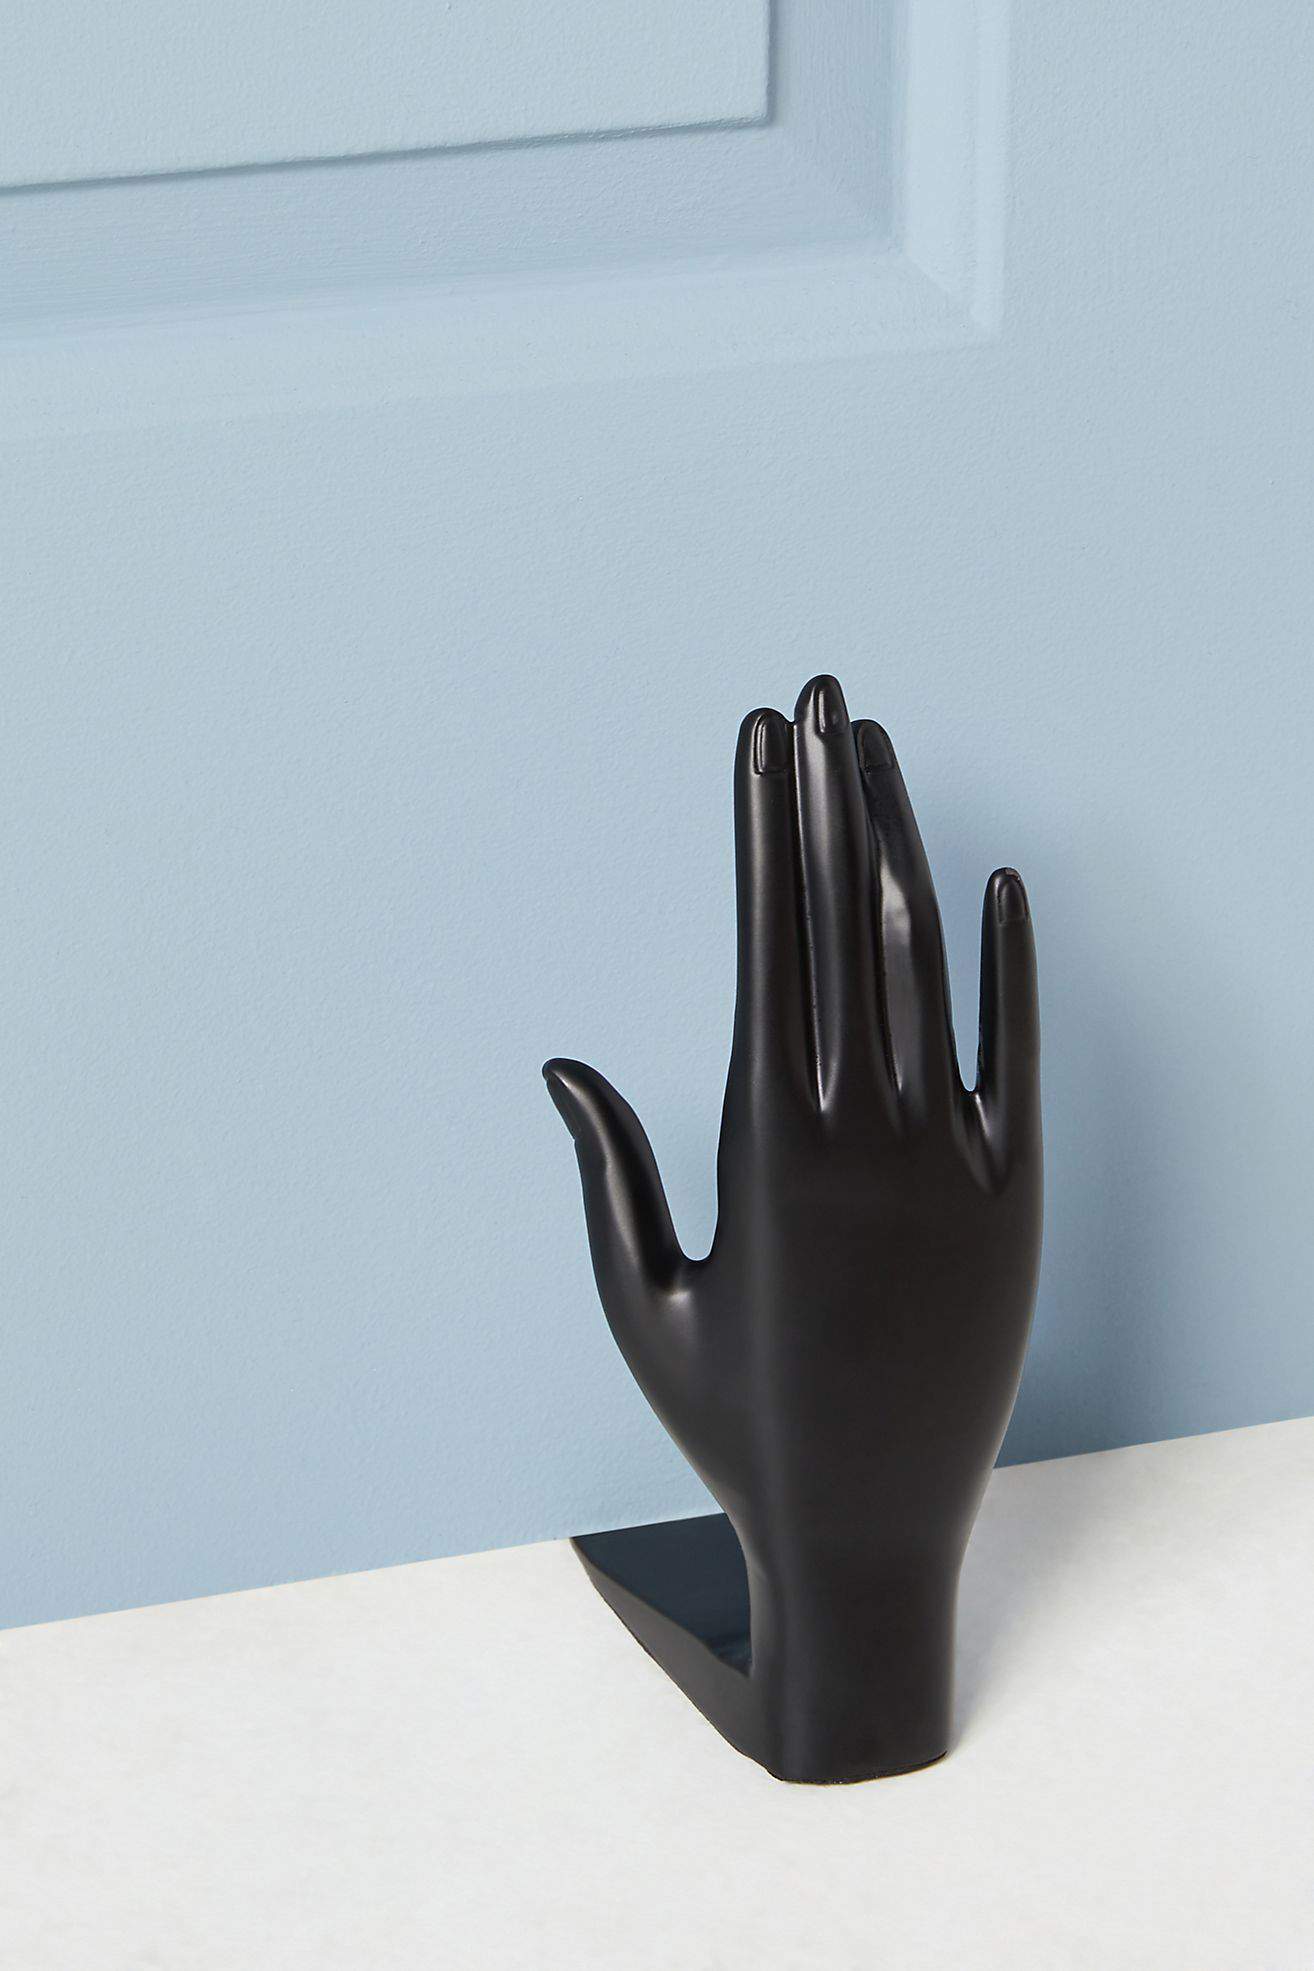 Any Bathroom Could Use A Chic Hand-Shaped Door Stopper